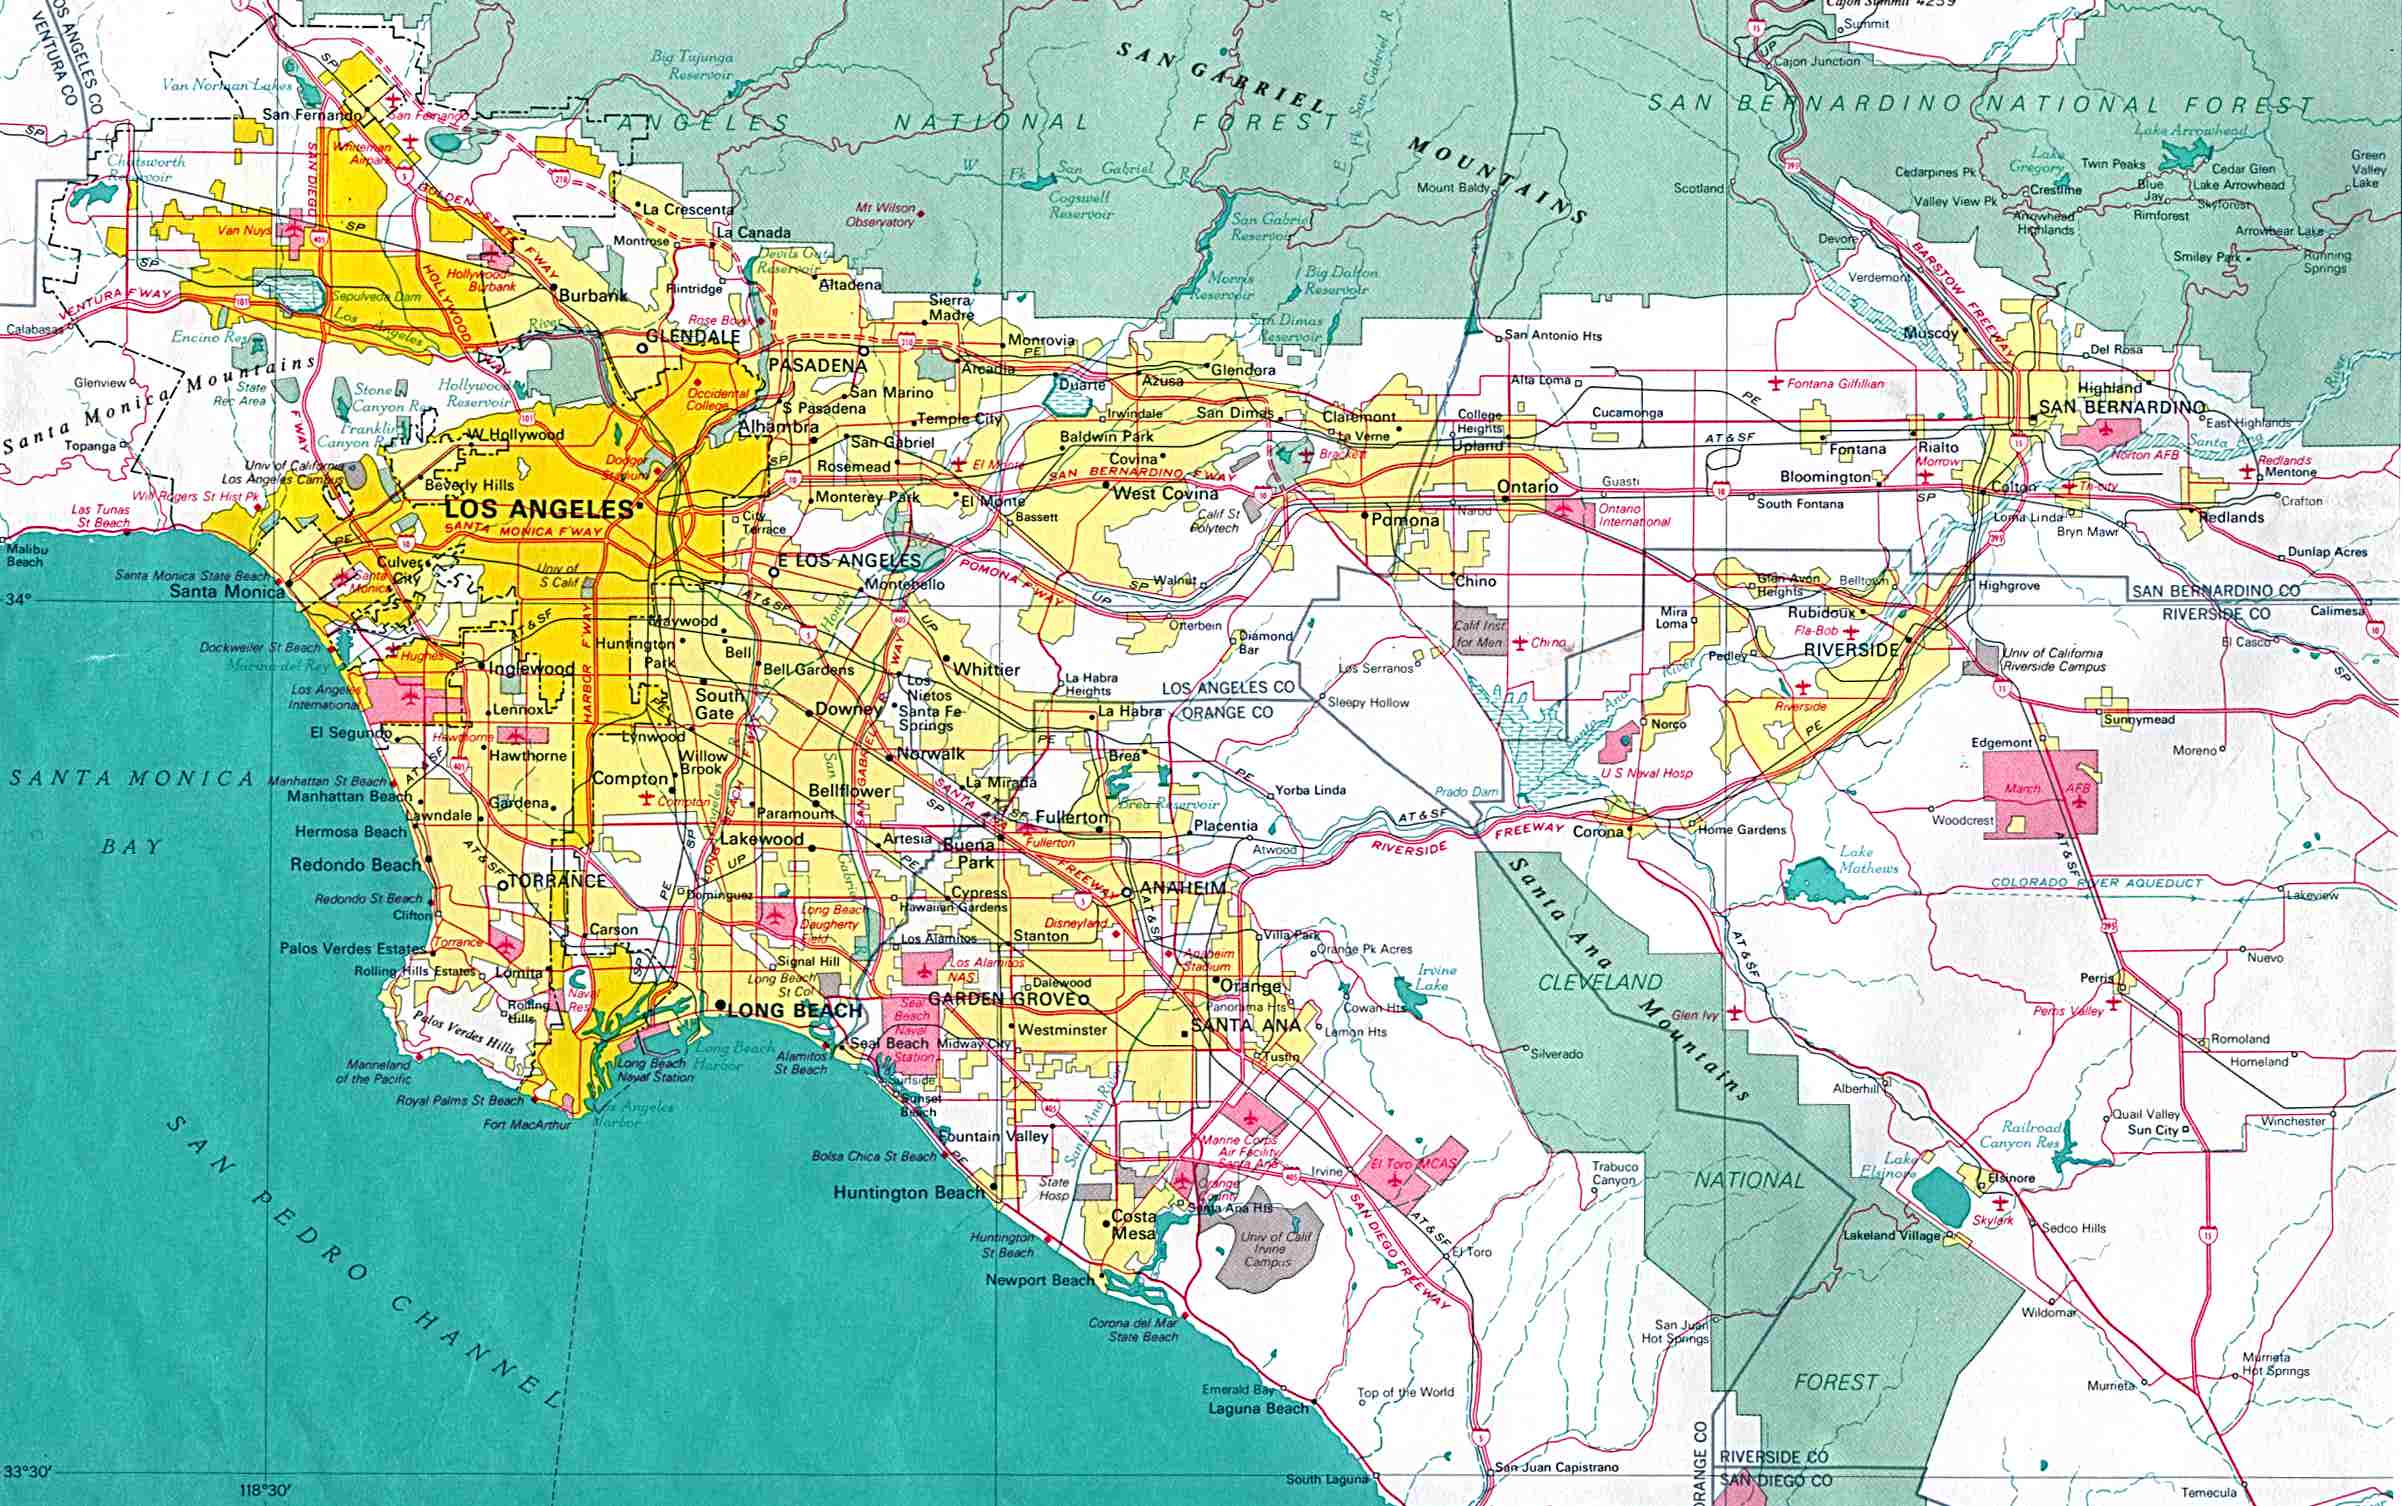 Google Map of the City Los Angeles, USA - Nations Online Project